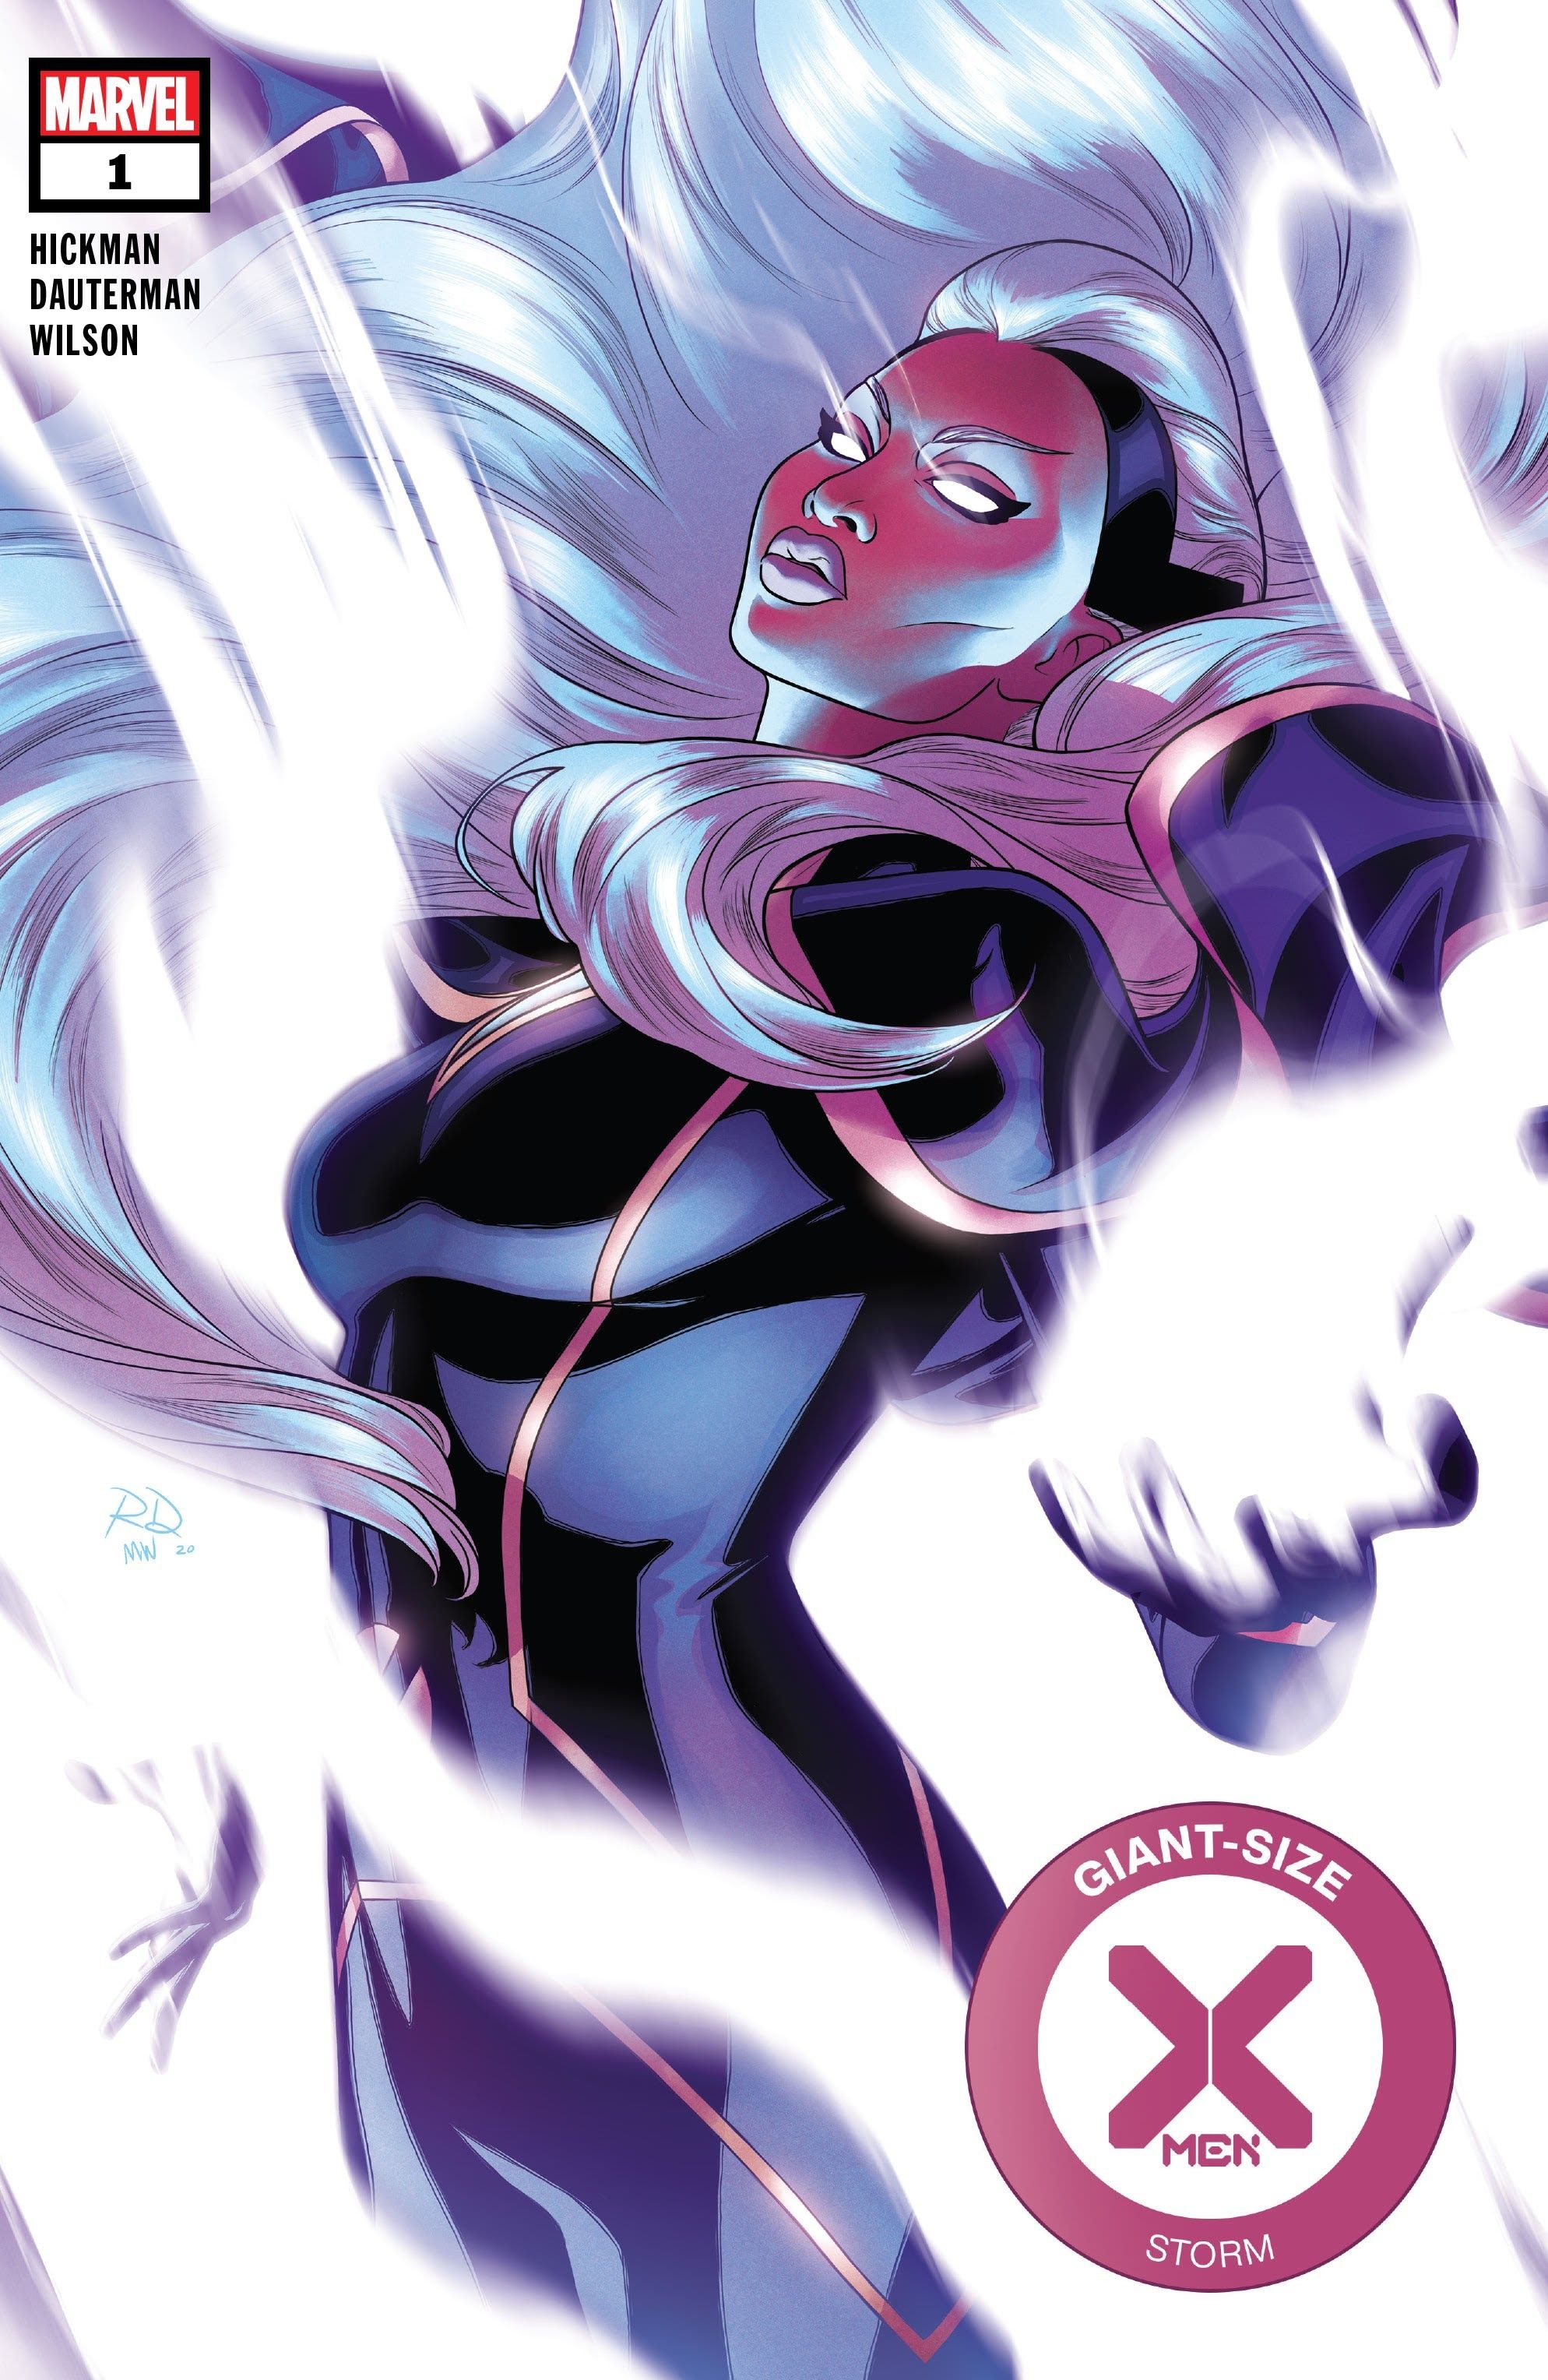 The cover of Giant Size X-Men: Storm #1